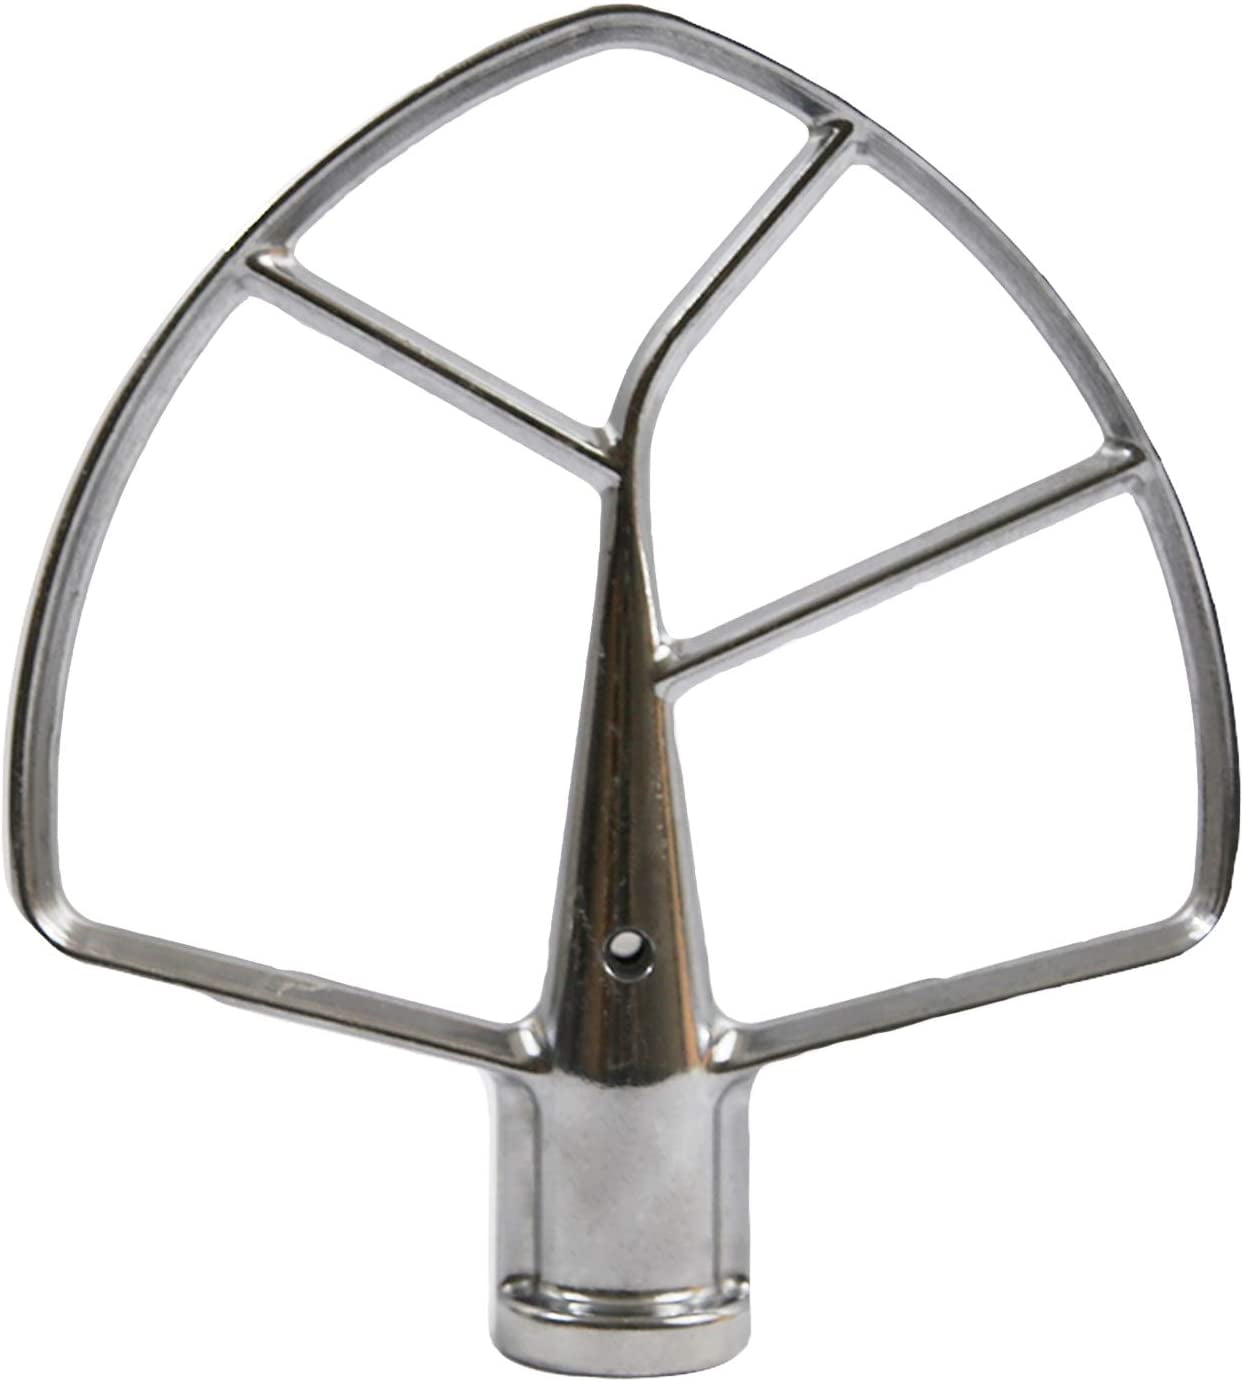 K45B Mixer Coated Flat Beater Replacement for KitchenAid > Speedy